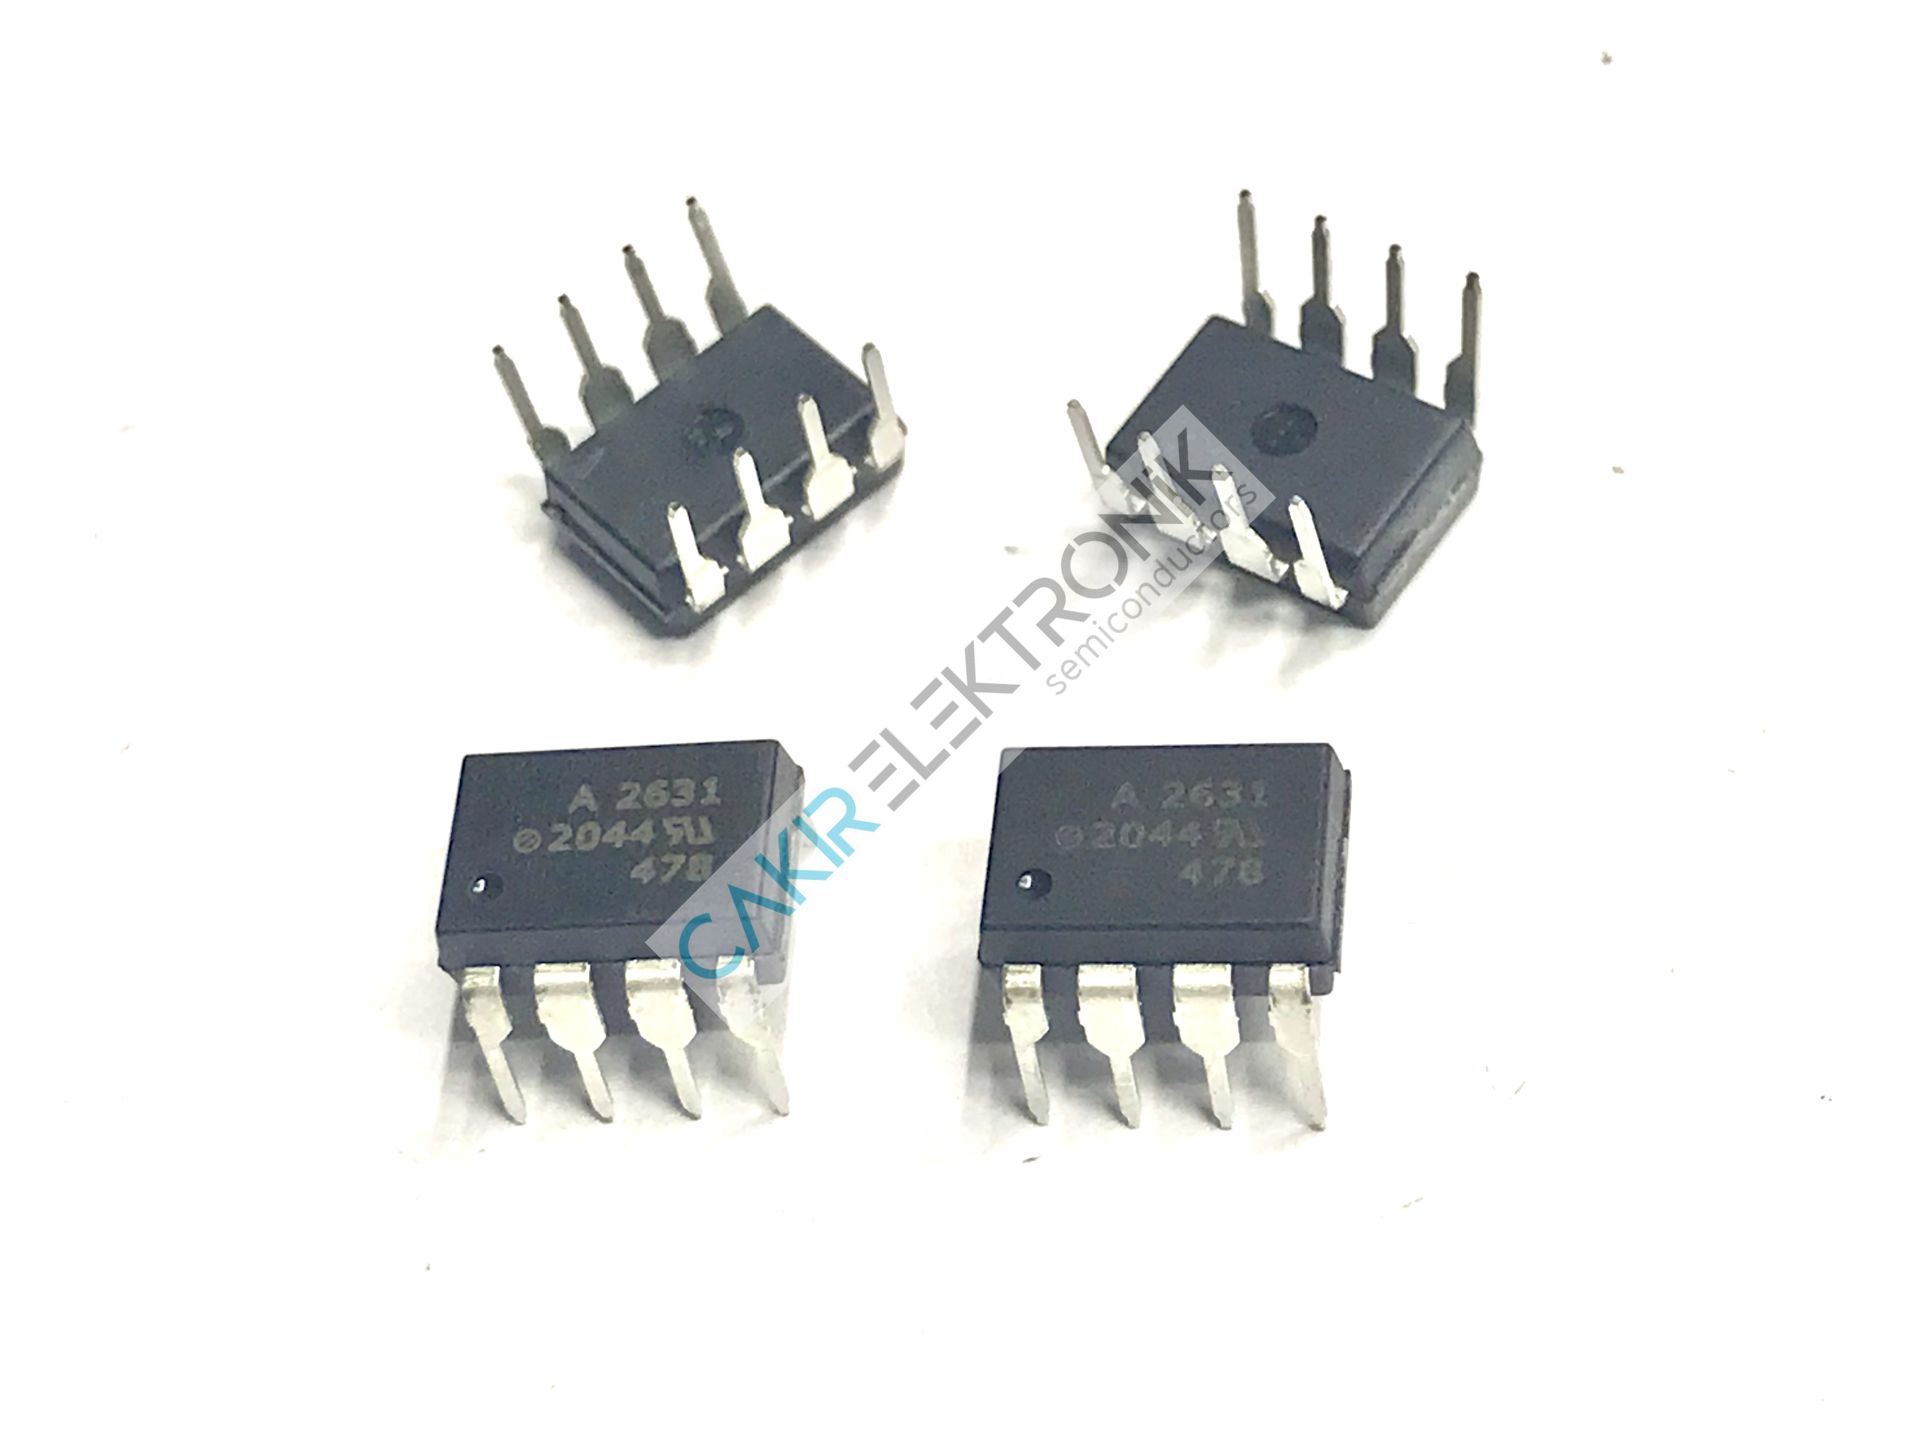 A2631 - HP2631 -  HCPL2631 - 8-Pin DIP Dual-Channel High Speed 10 MBit/s Logic Gate Output